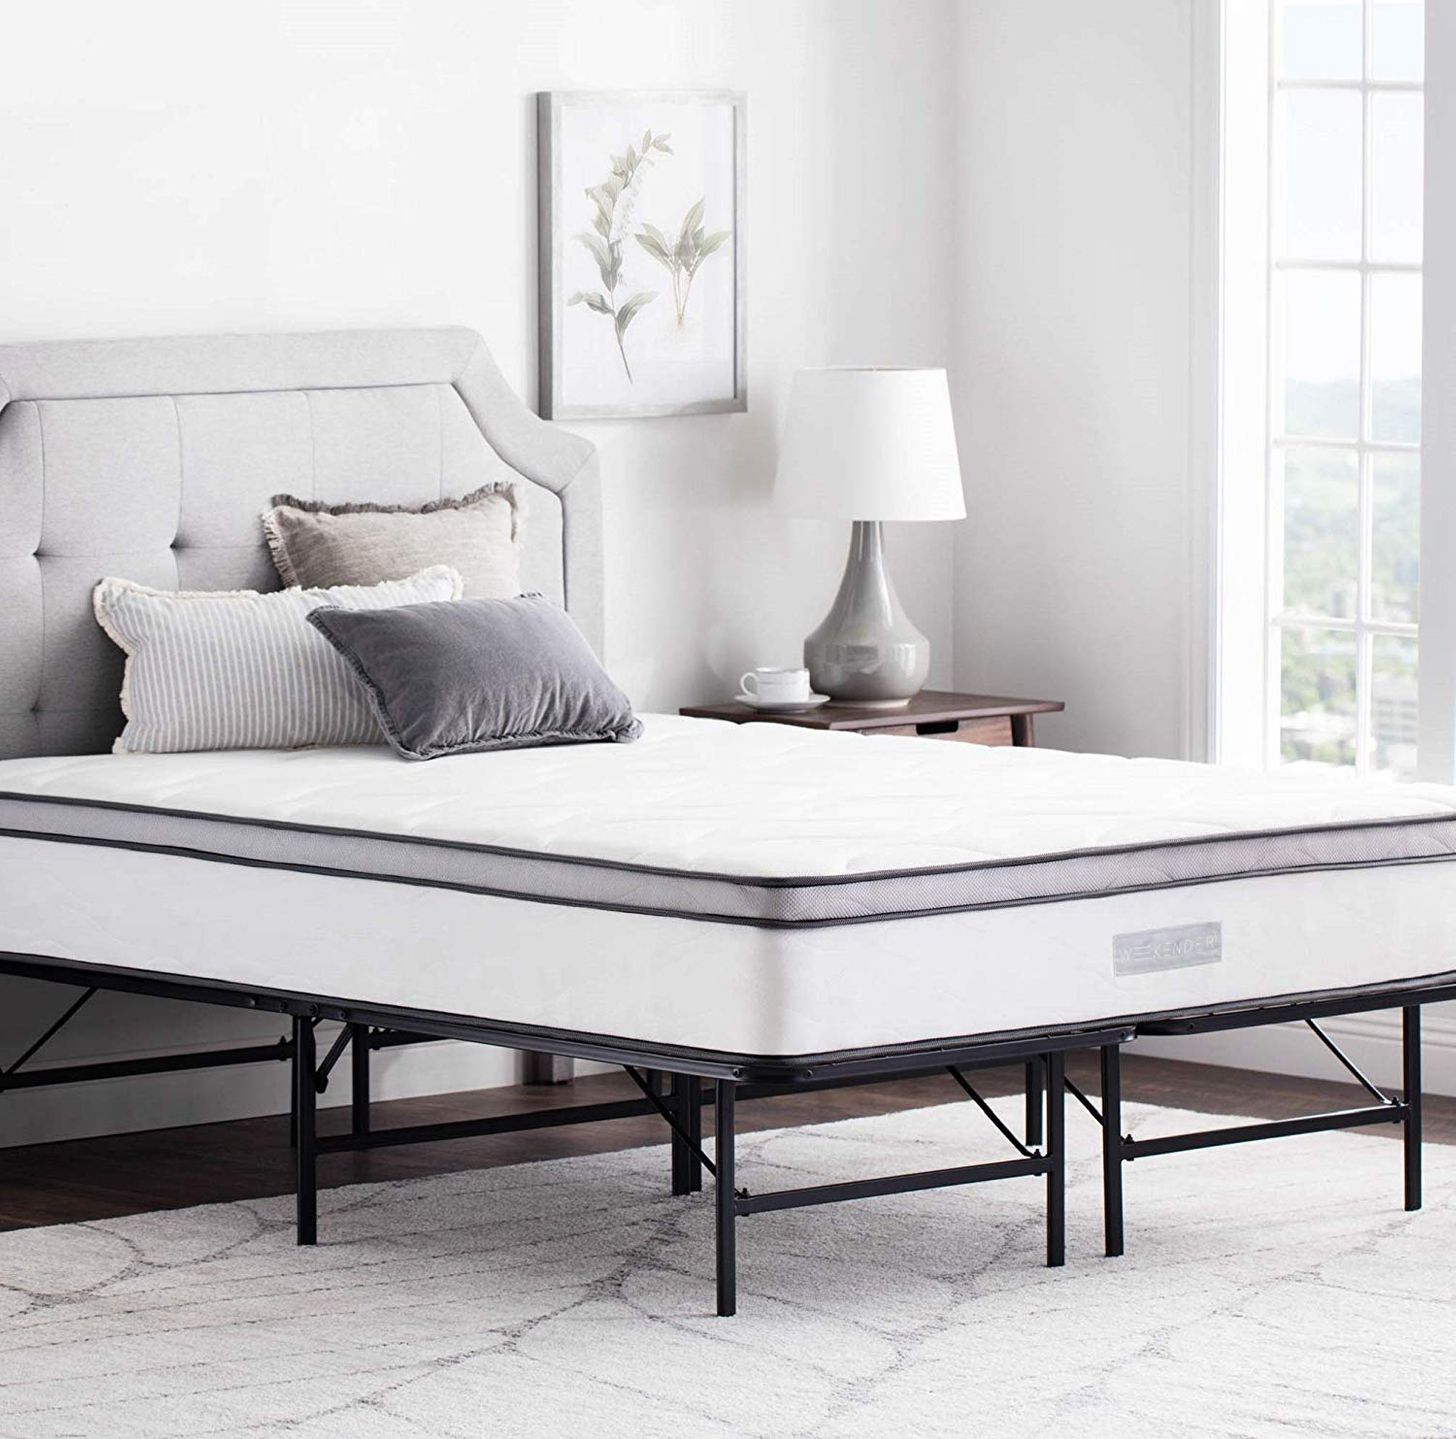 19 Best Metal Bed Frames 2020 The, Does A Metal Bed Frame Need A Boxspring